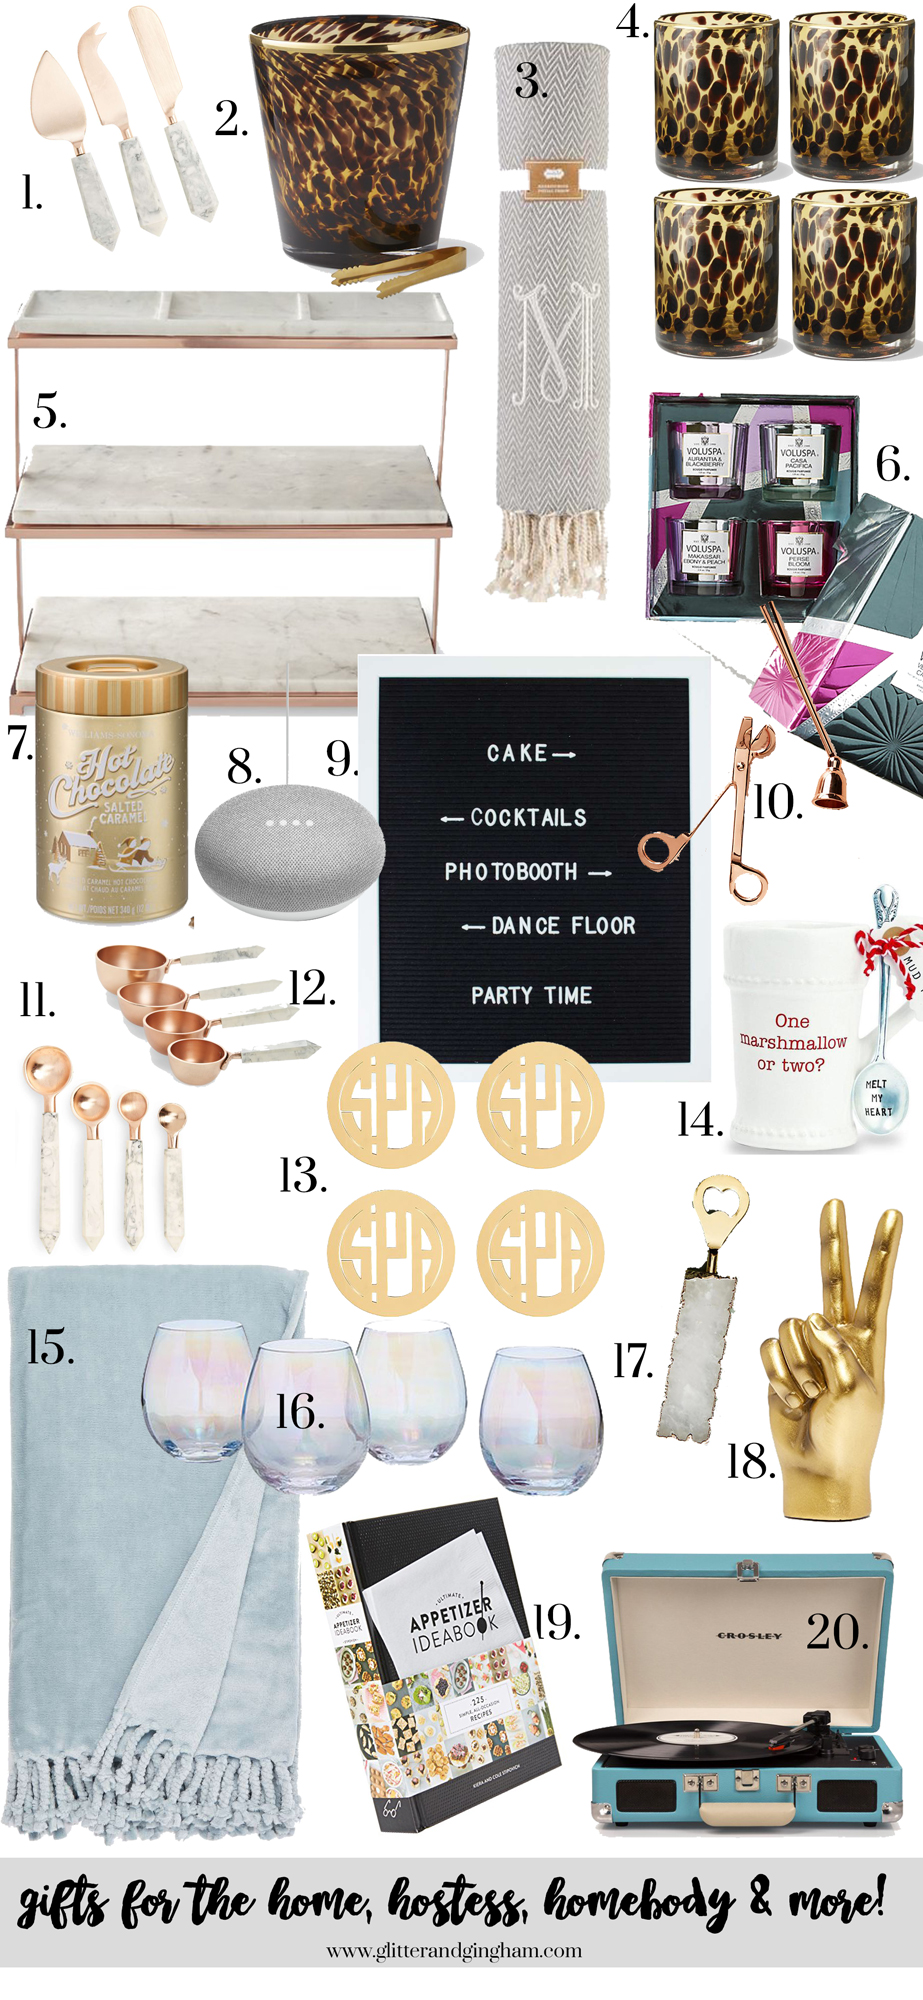 Holiday Gifts for the home / hostess gifts 